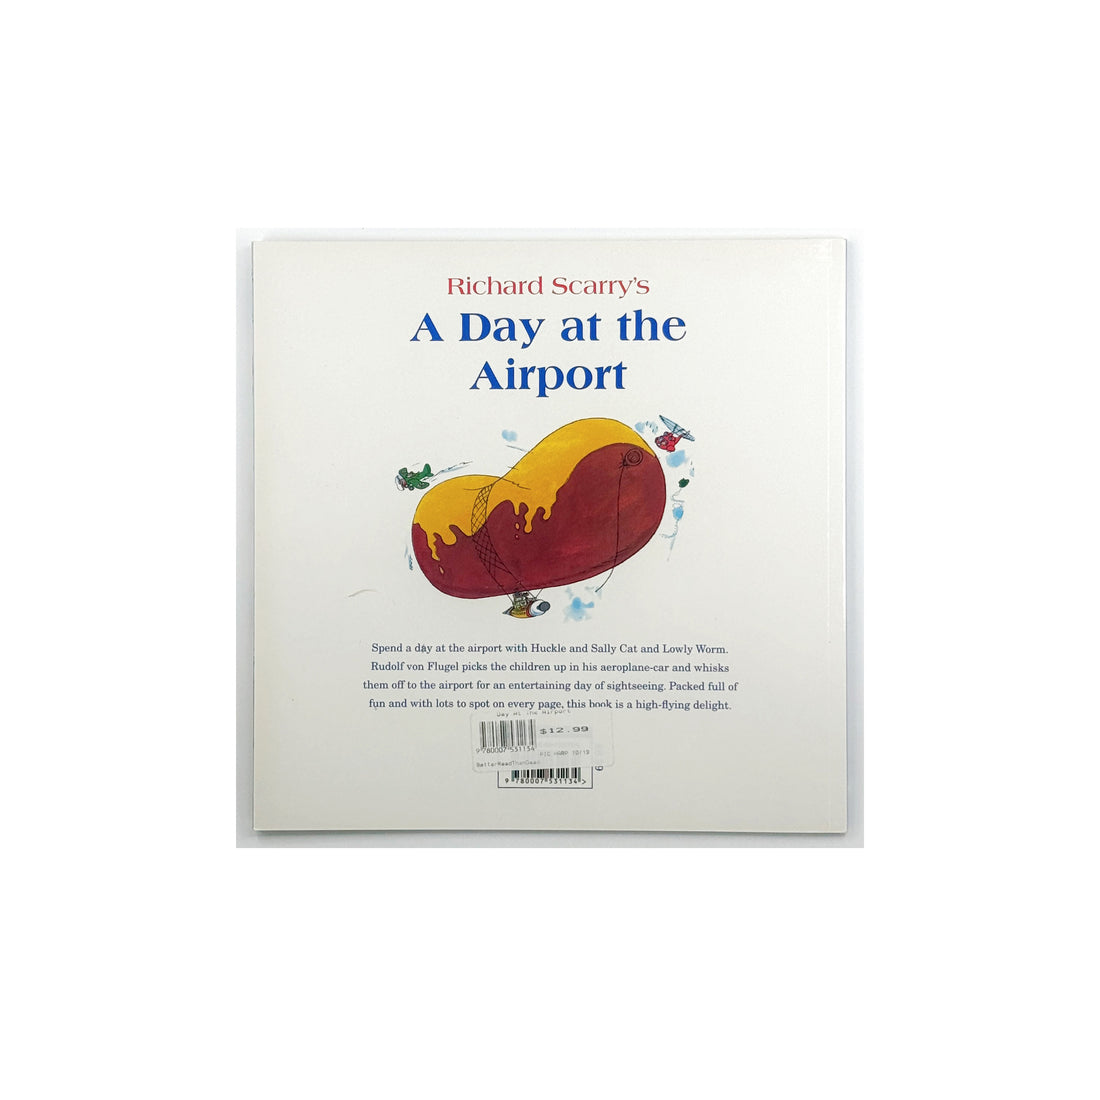 A Day at the Airport by Richard Scarry